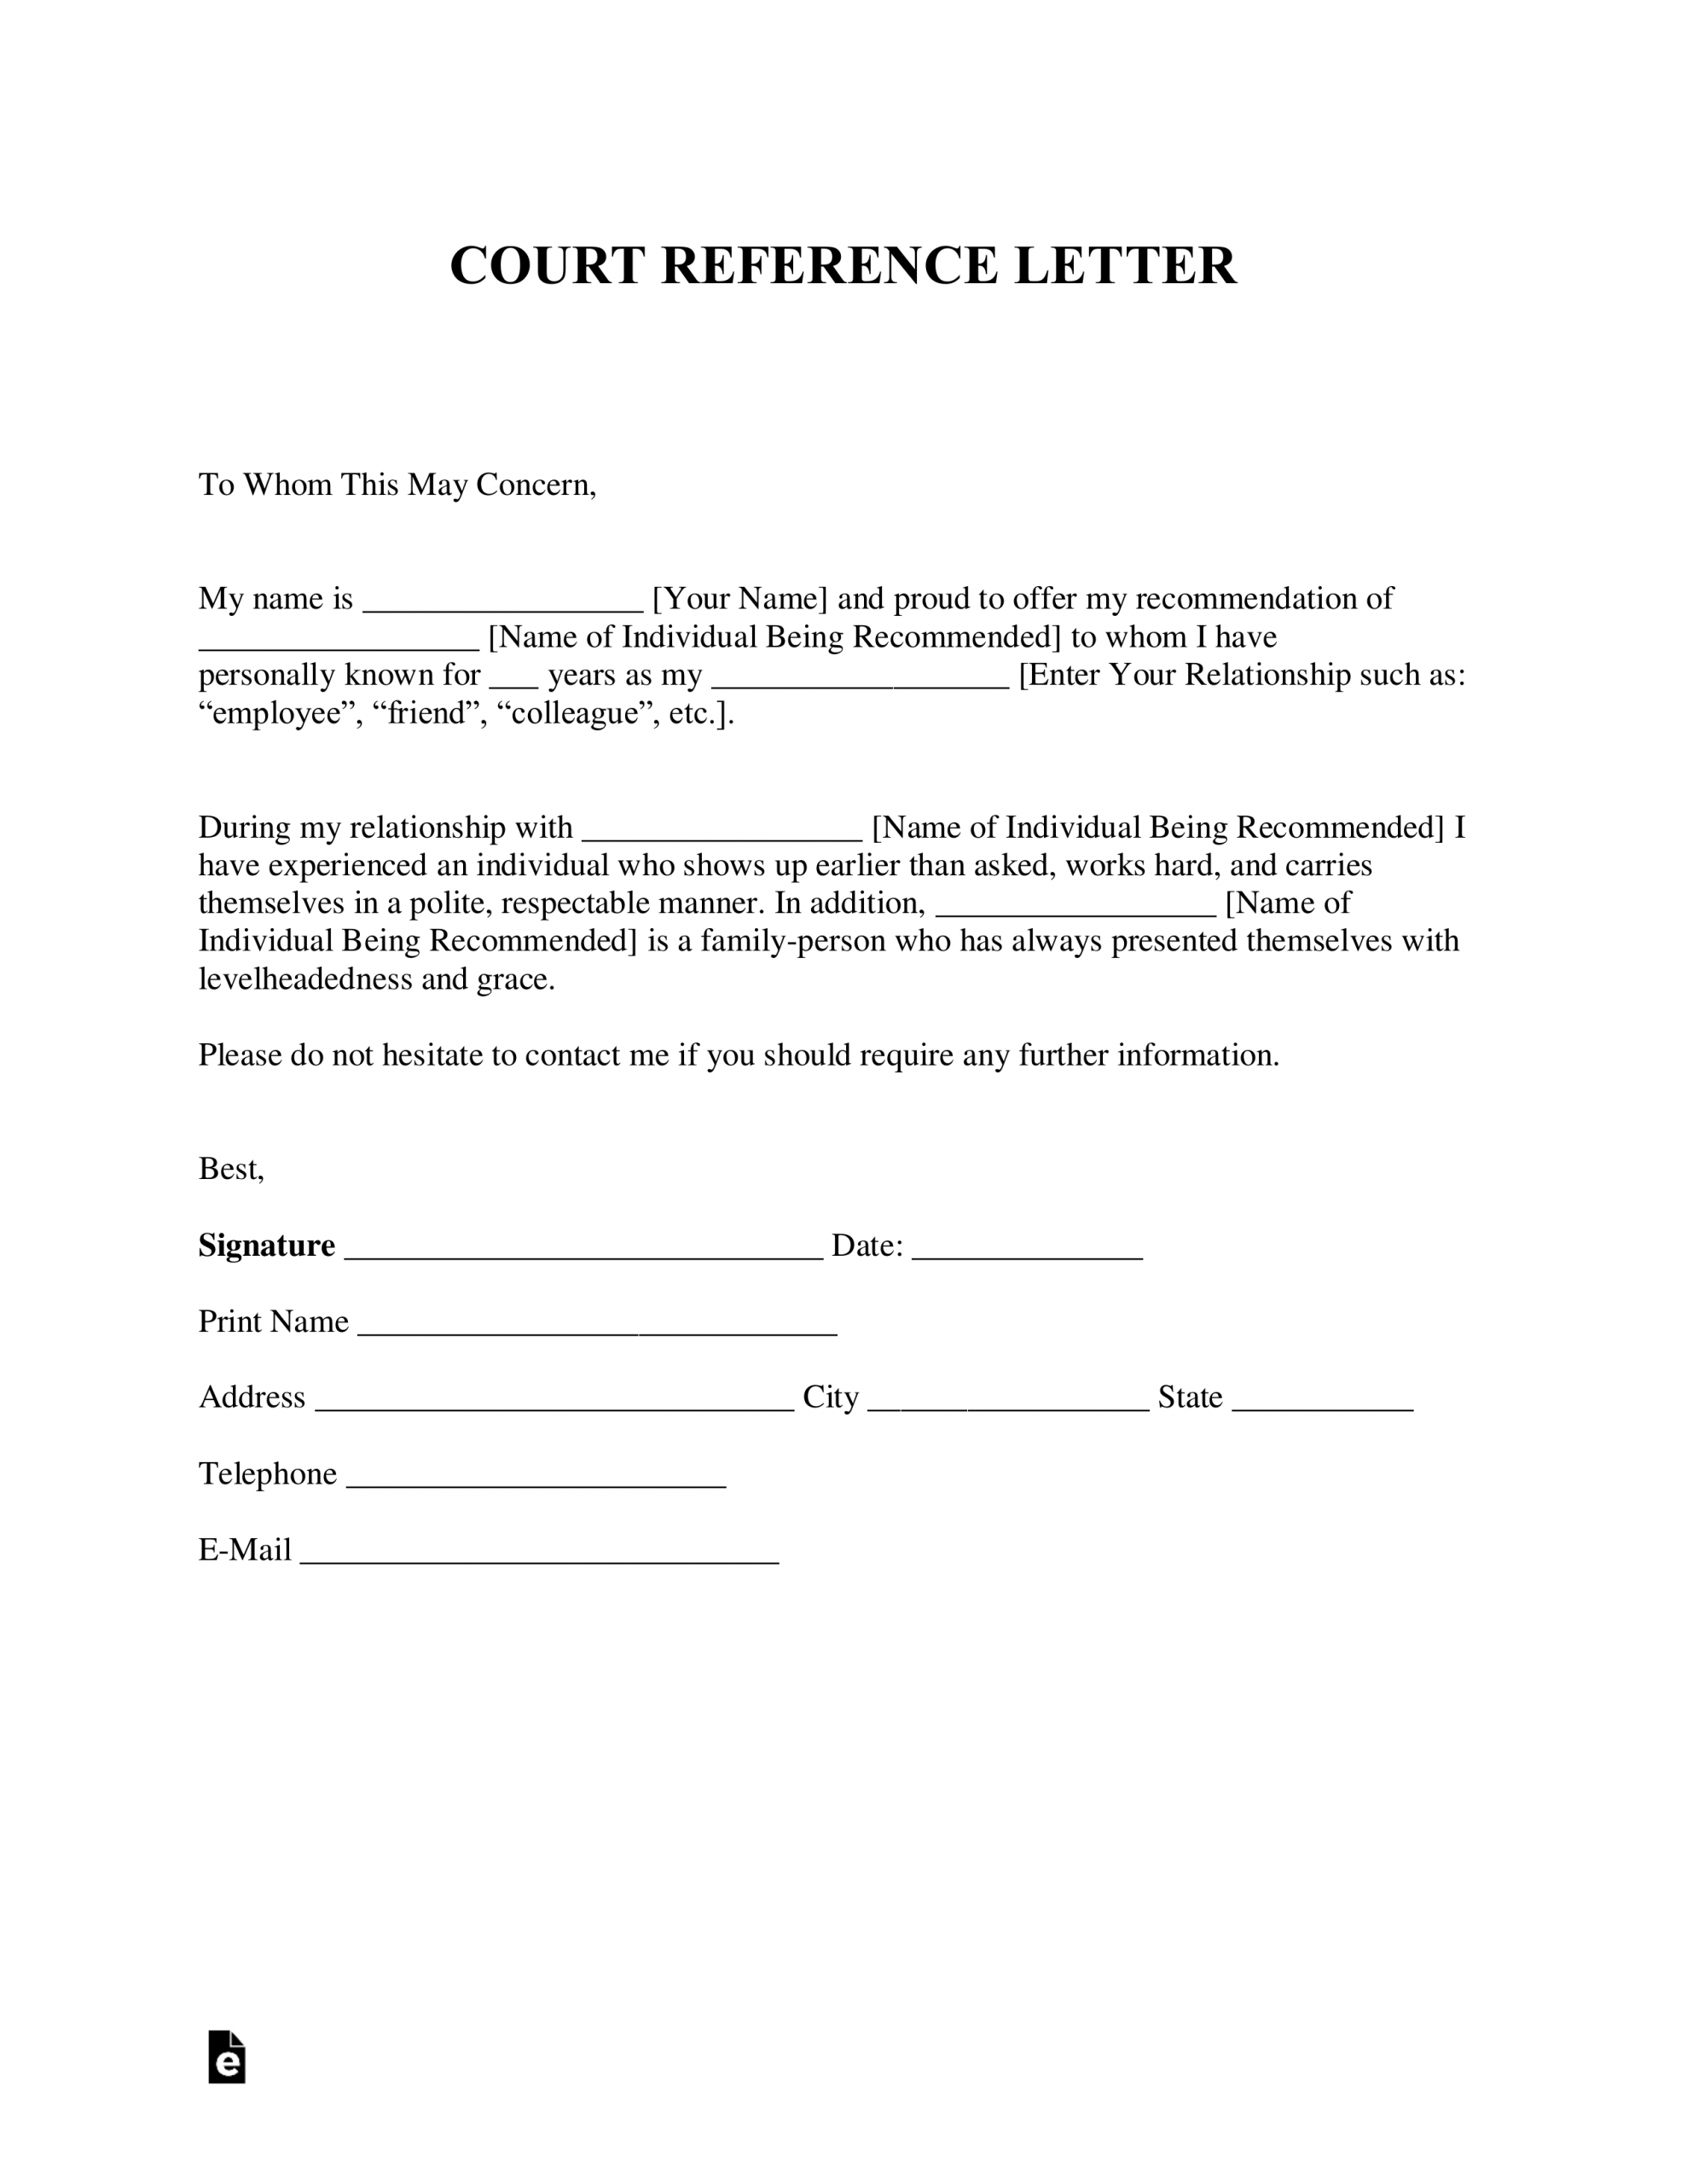 Character Reference Letter For Court Template